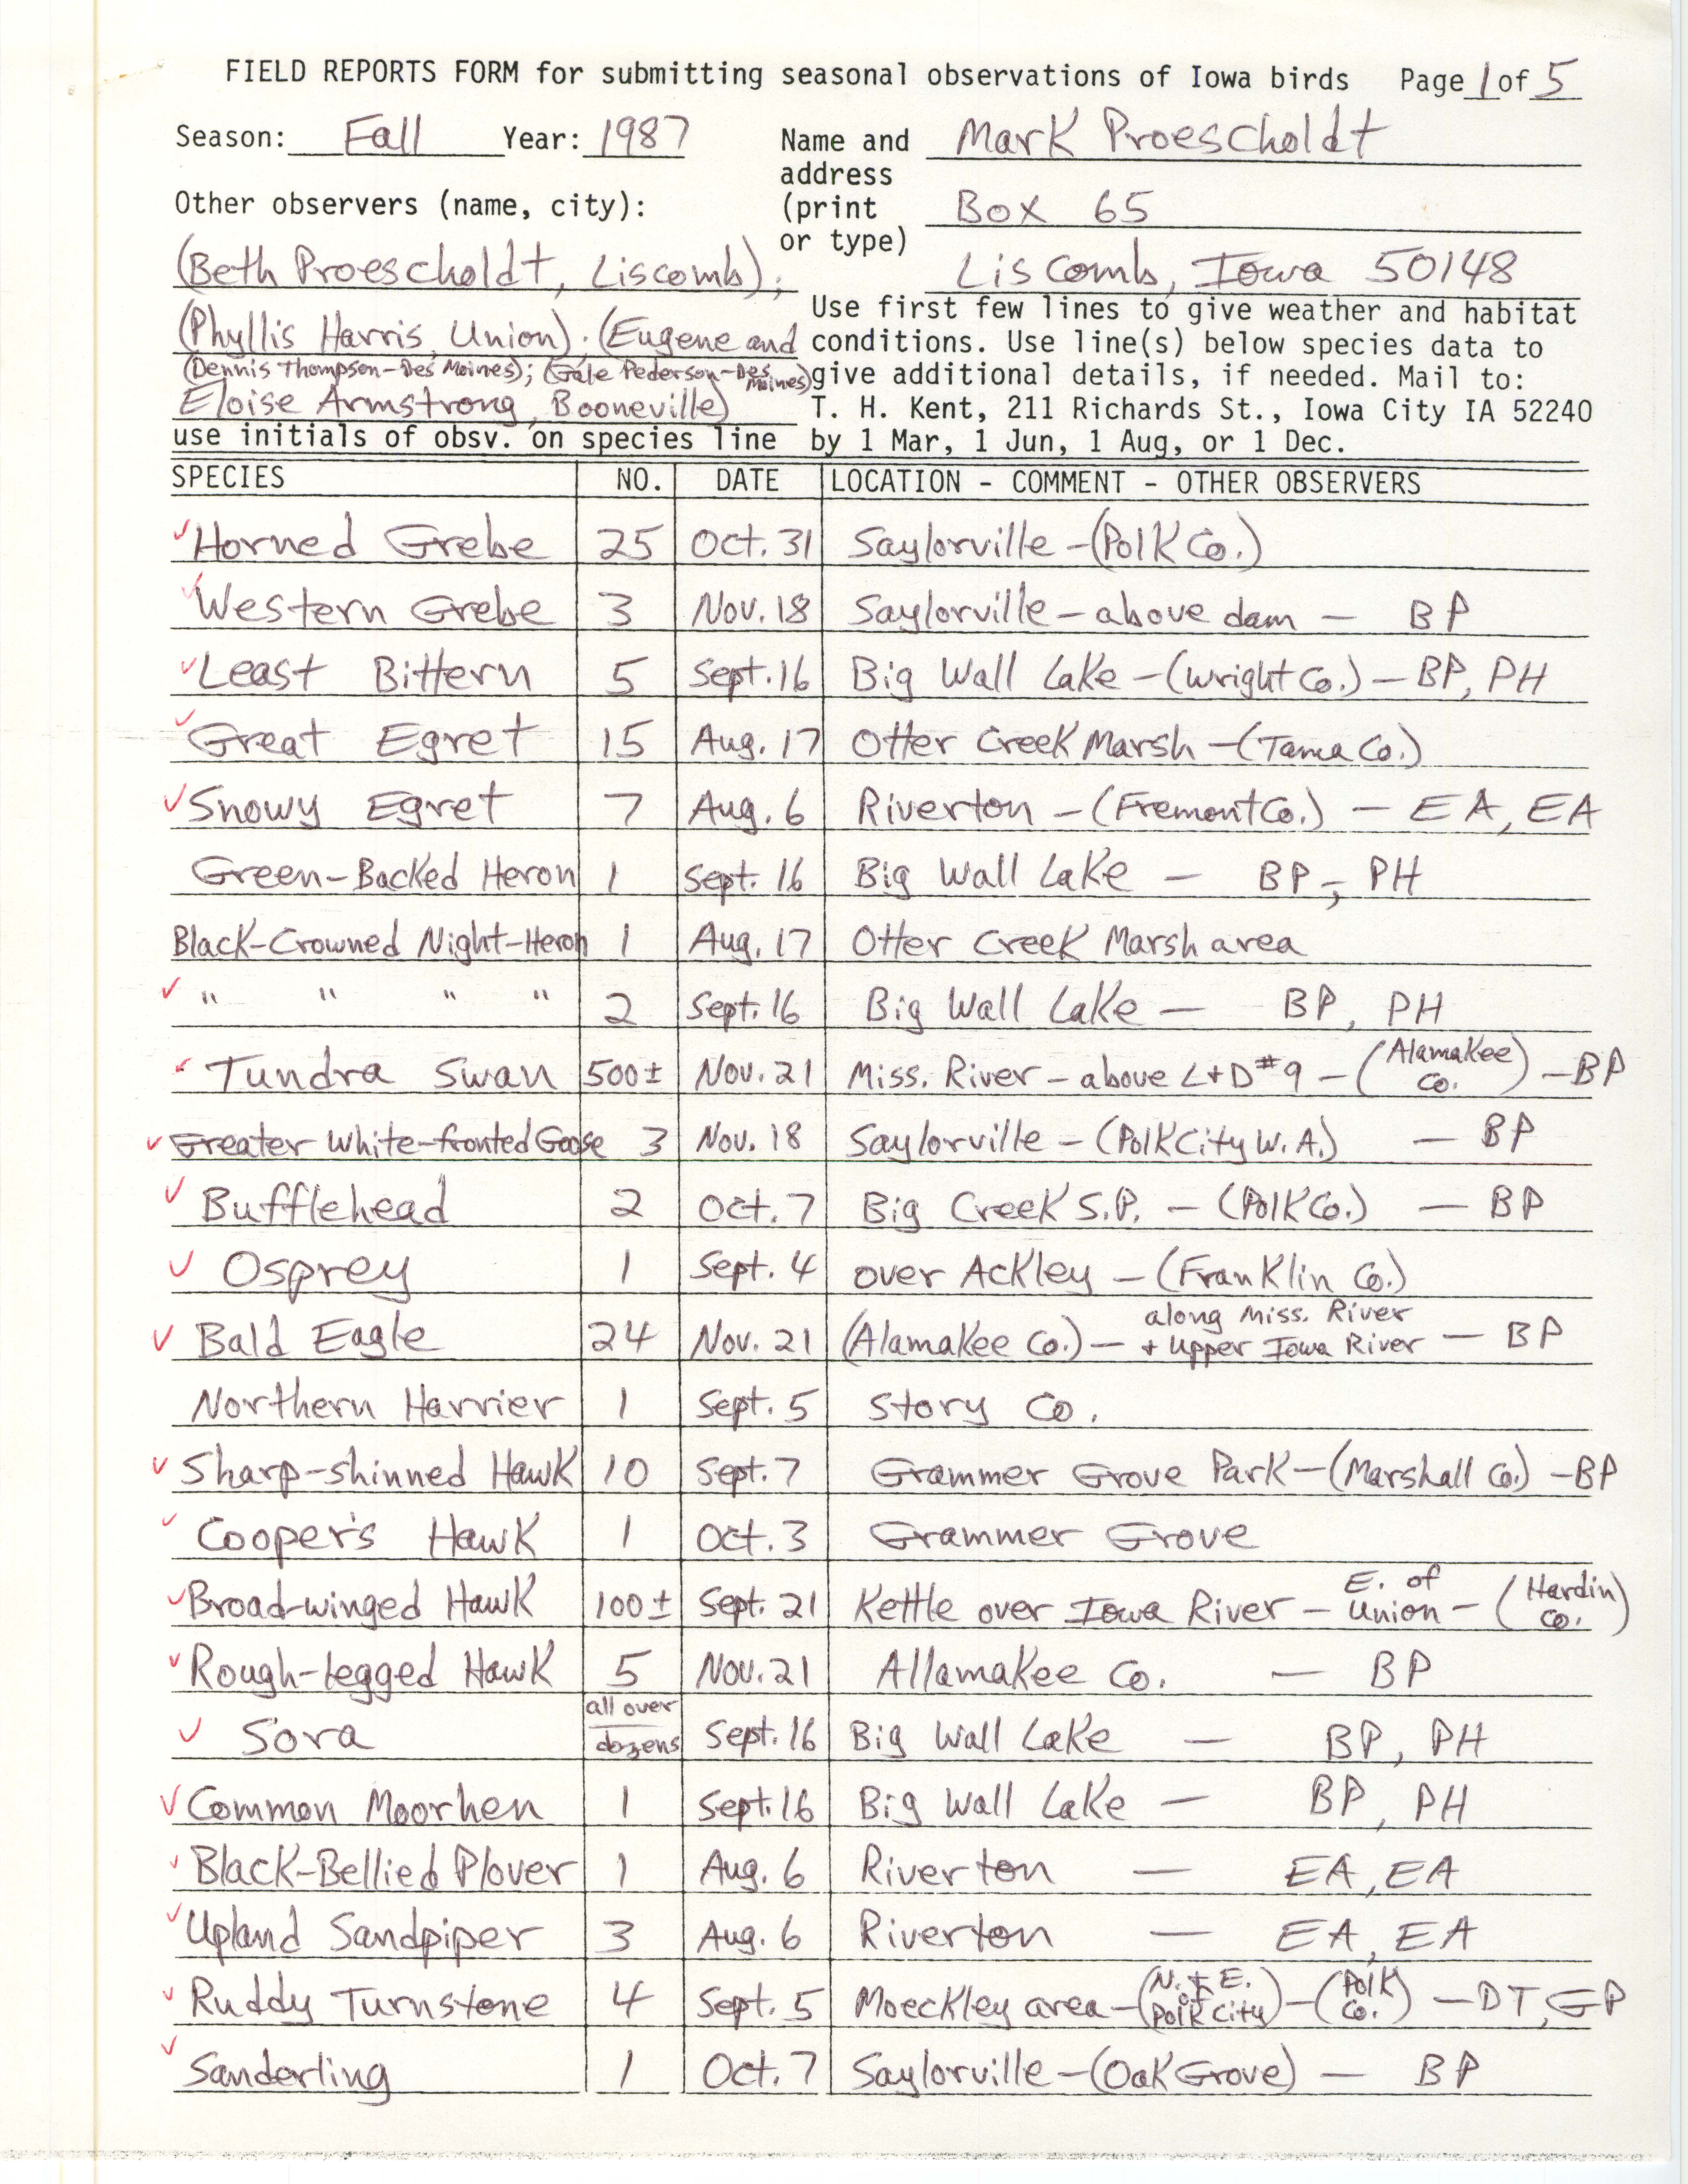 Field reports form for submitting seasonal observations of Iowa birds, Mark Proescholdt, fall 1987